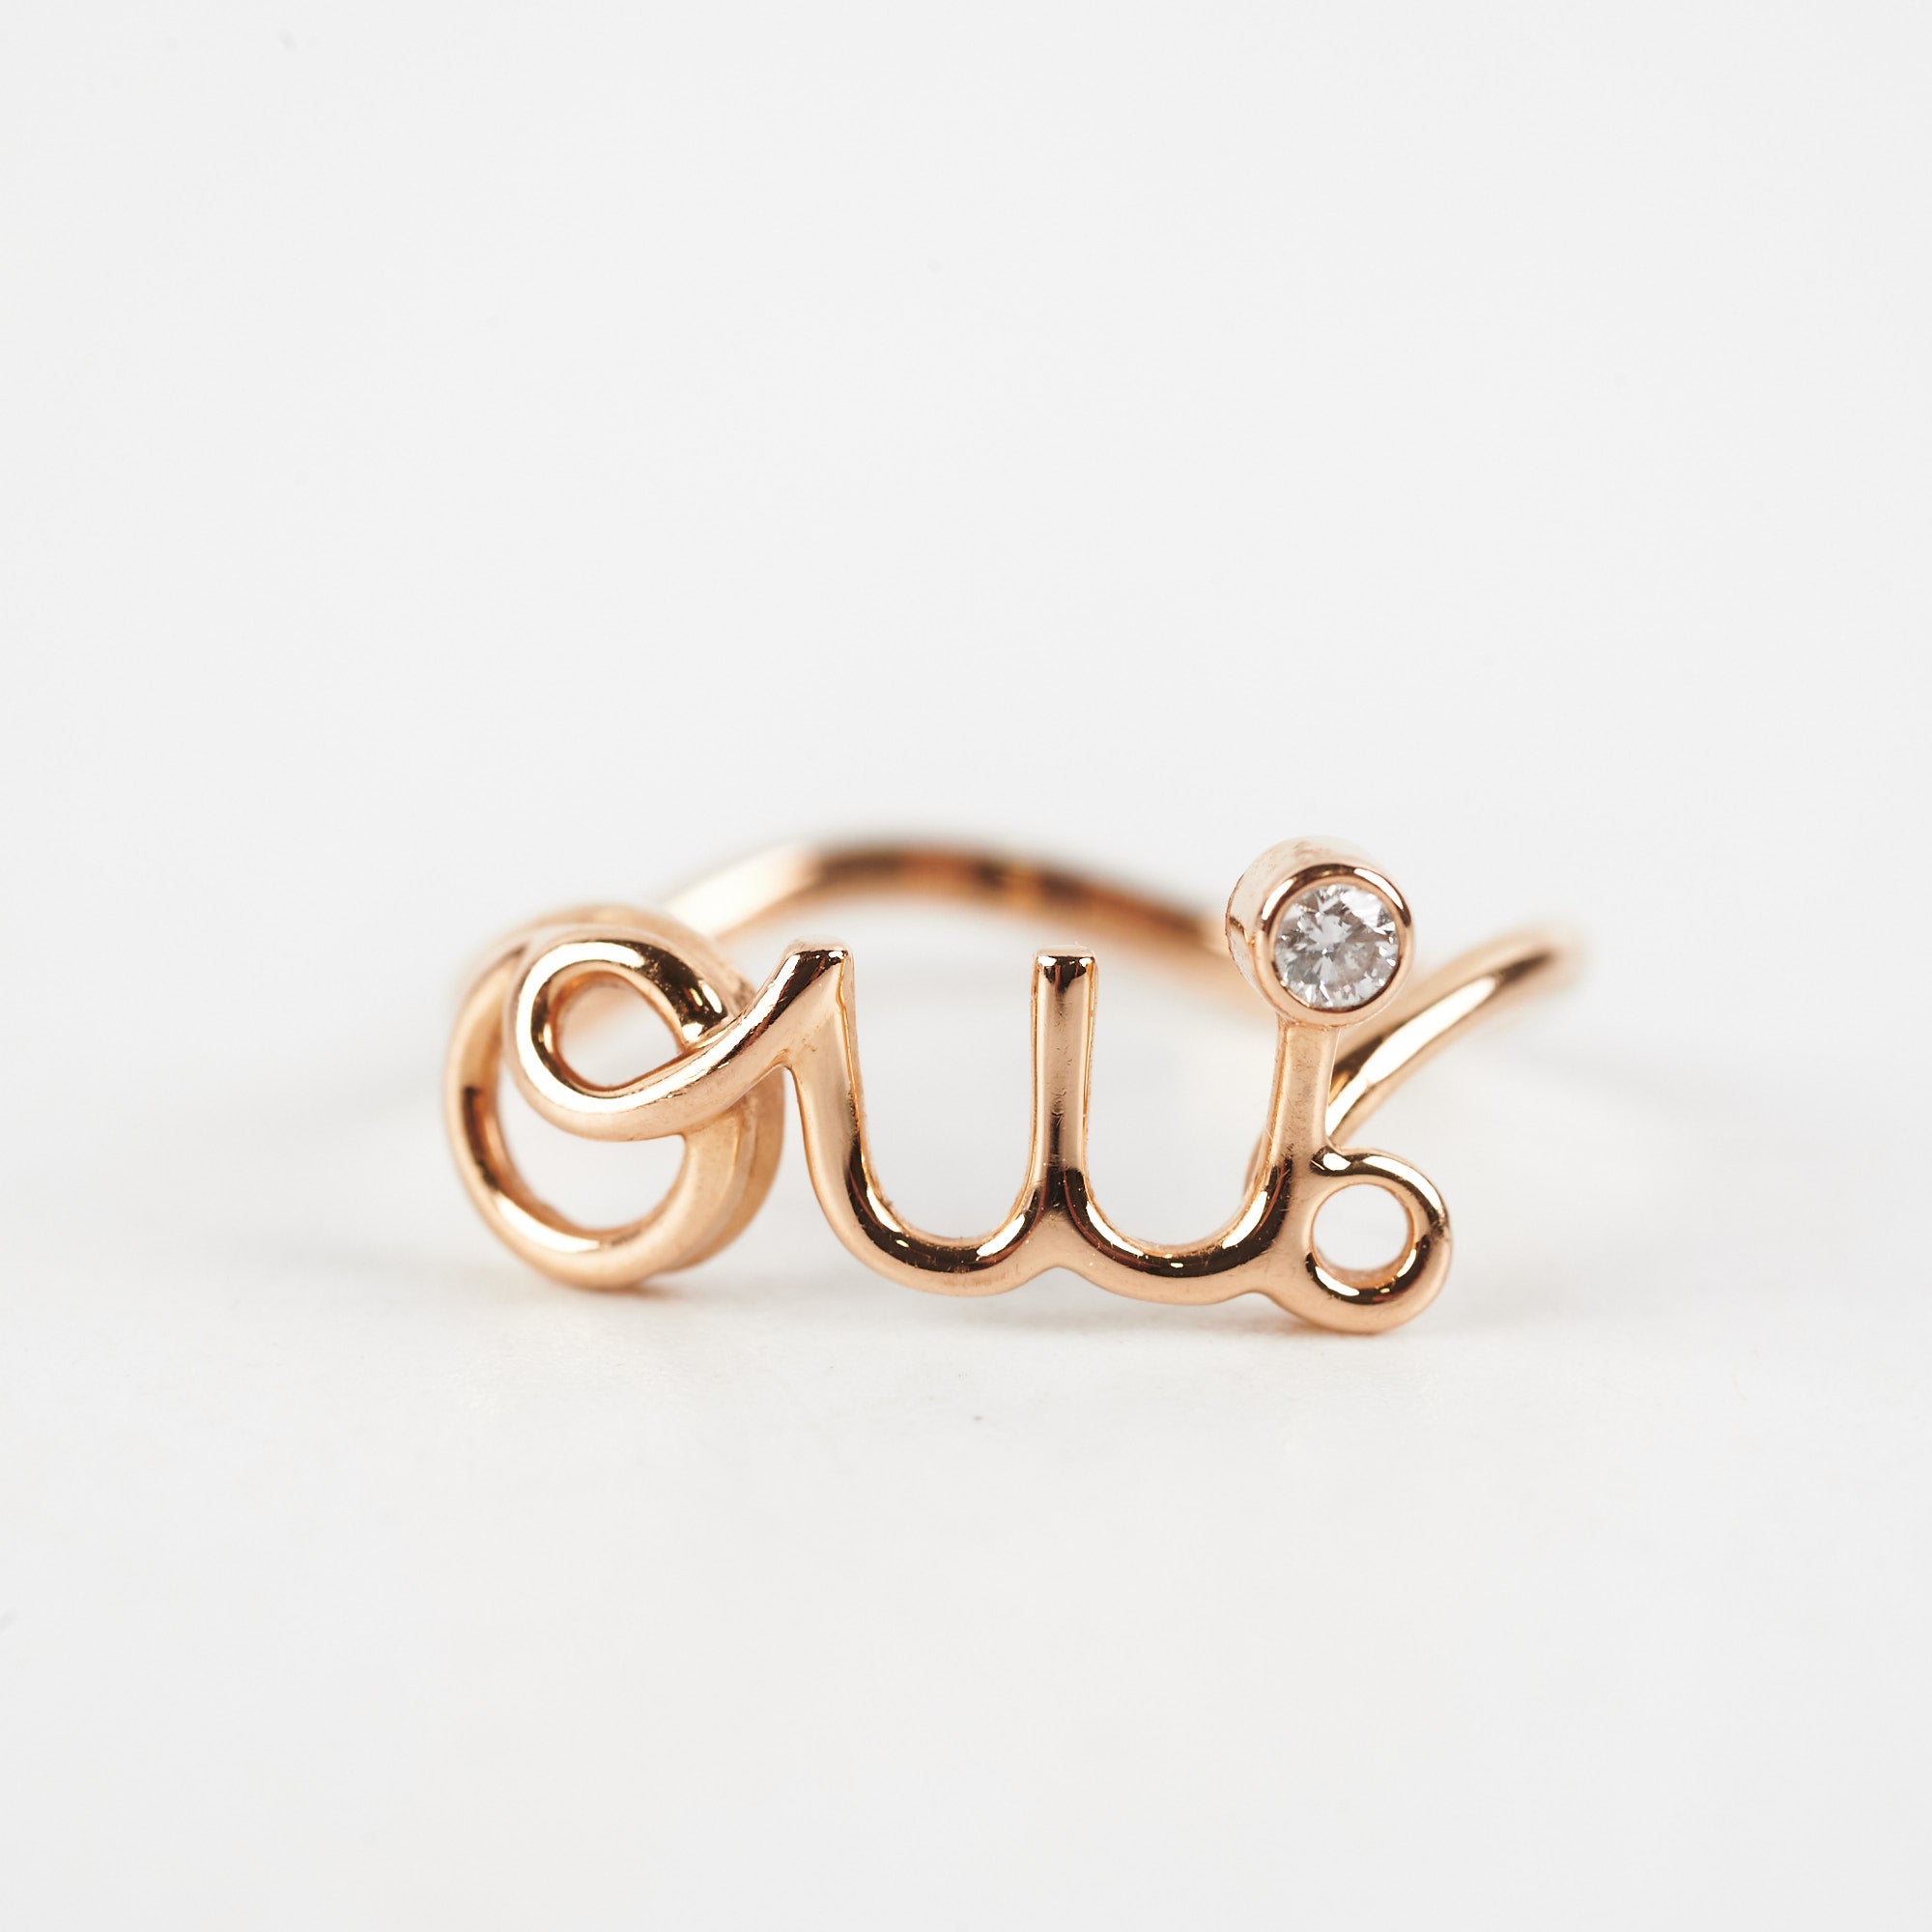 Gold OUI Ring French Word Wire Adjustable Band Ring Yes I Do  Etsy